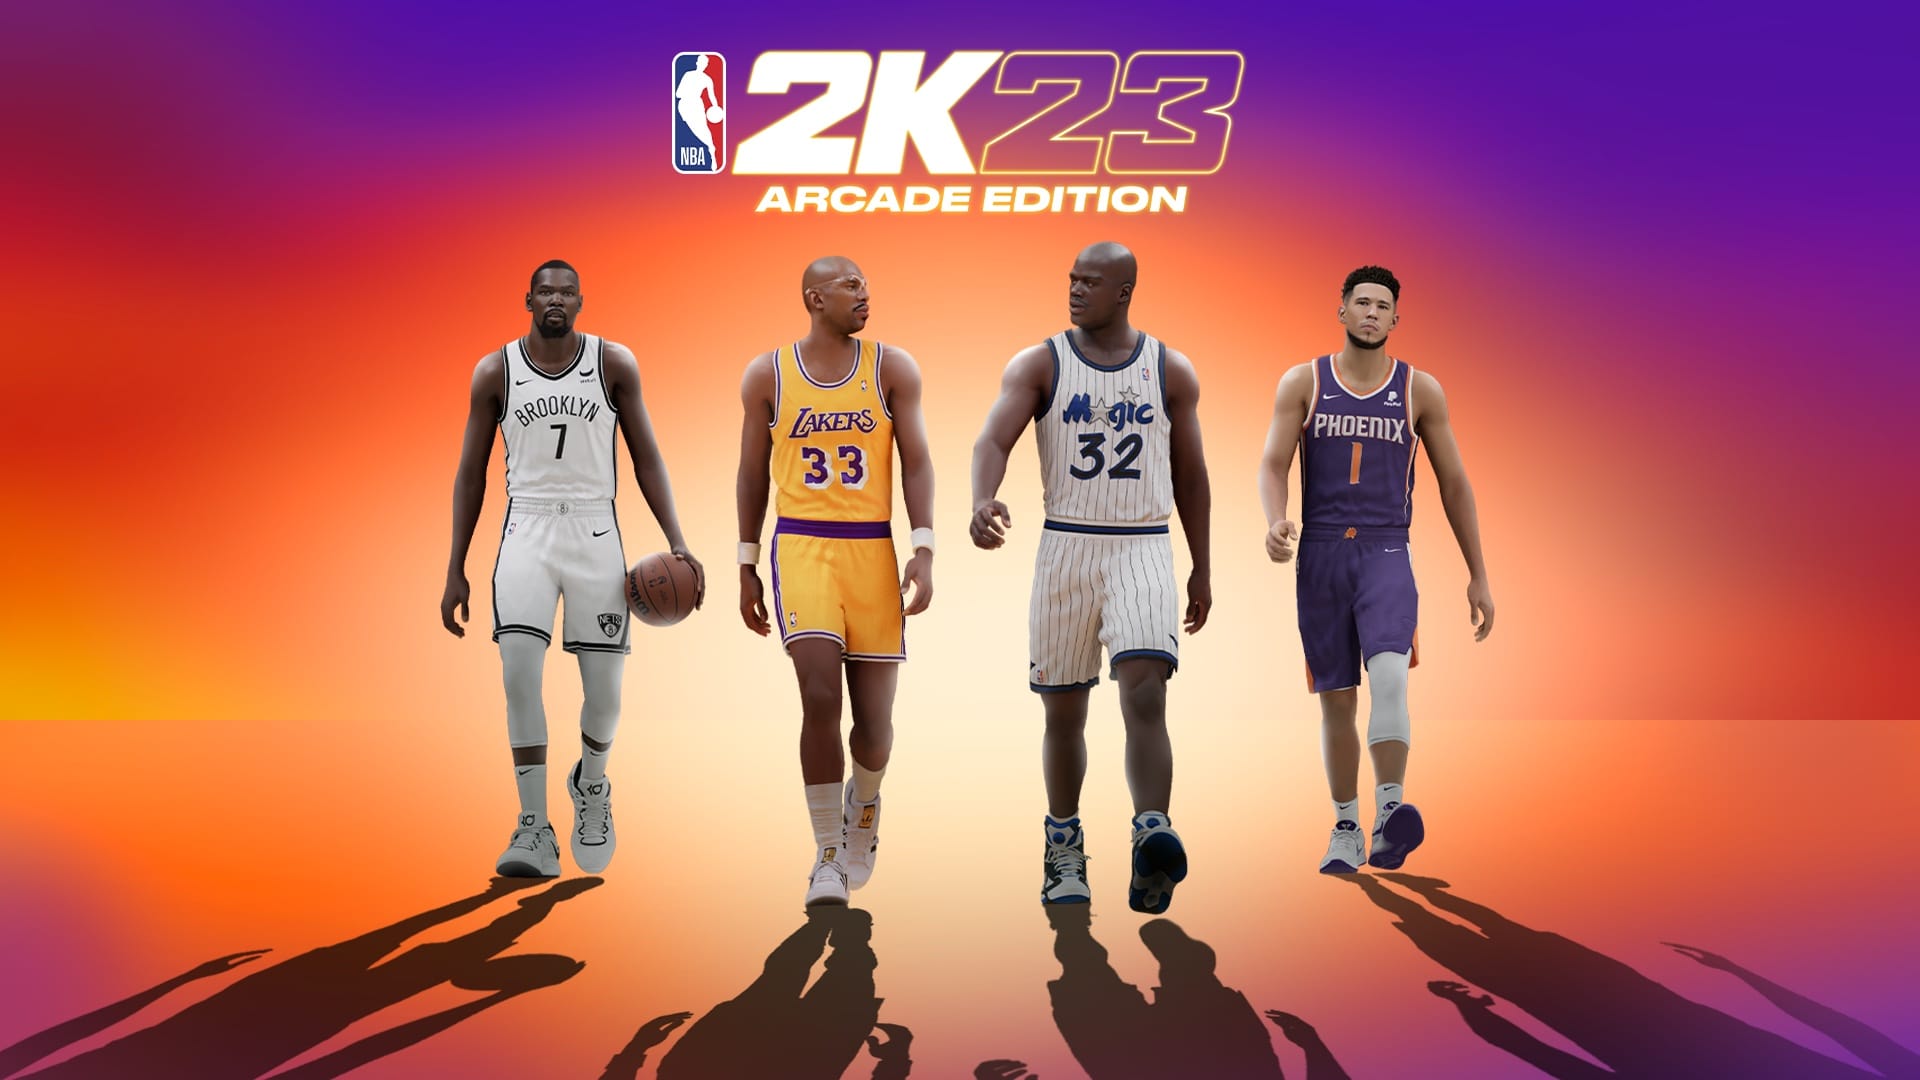 Basketball lovers can leap into the motion in ‘NBA 2K23’ on Apple Arcade